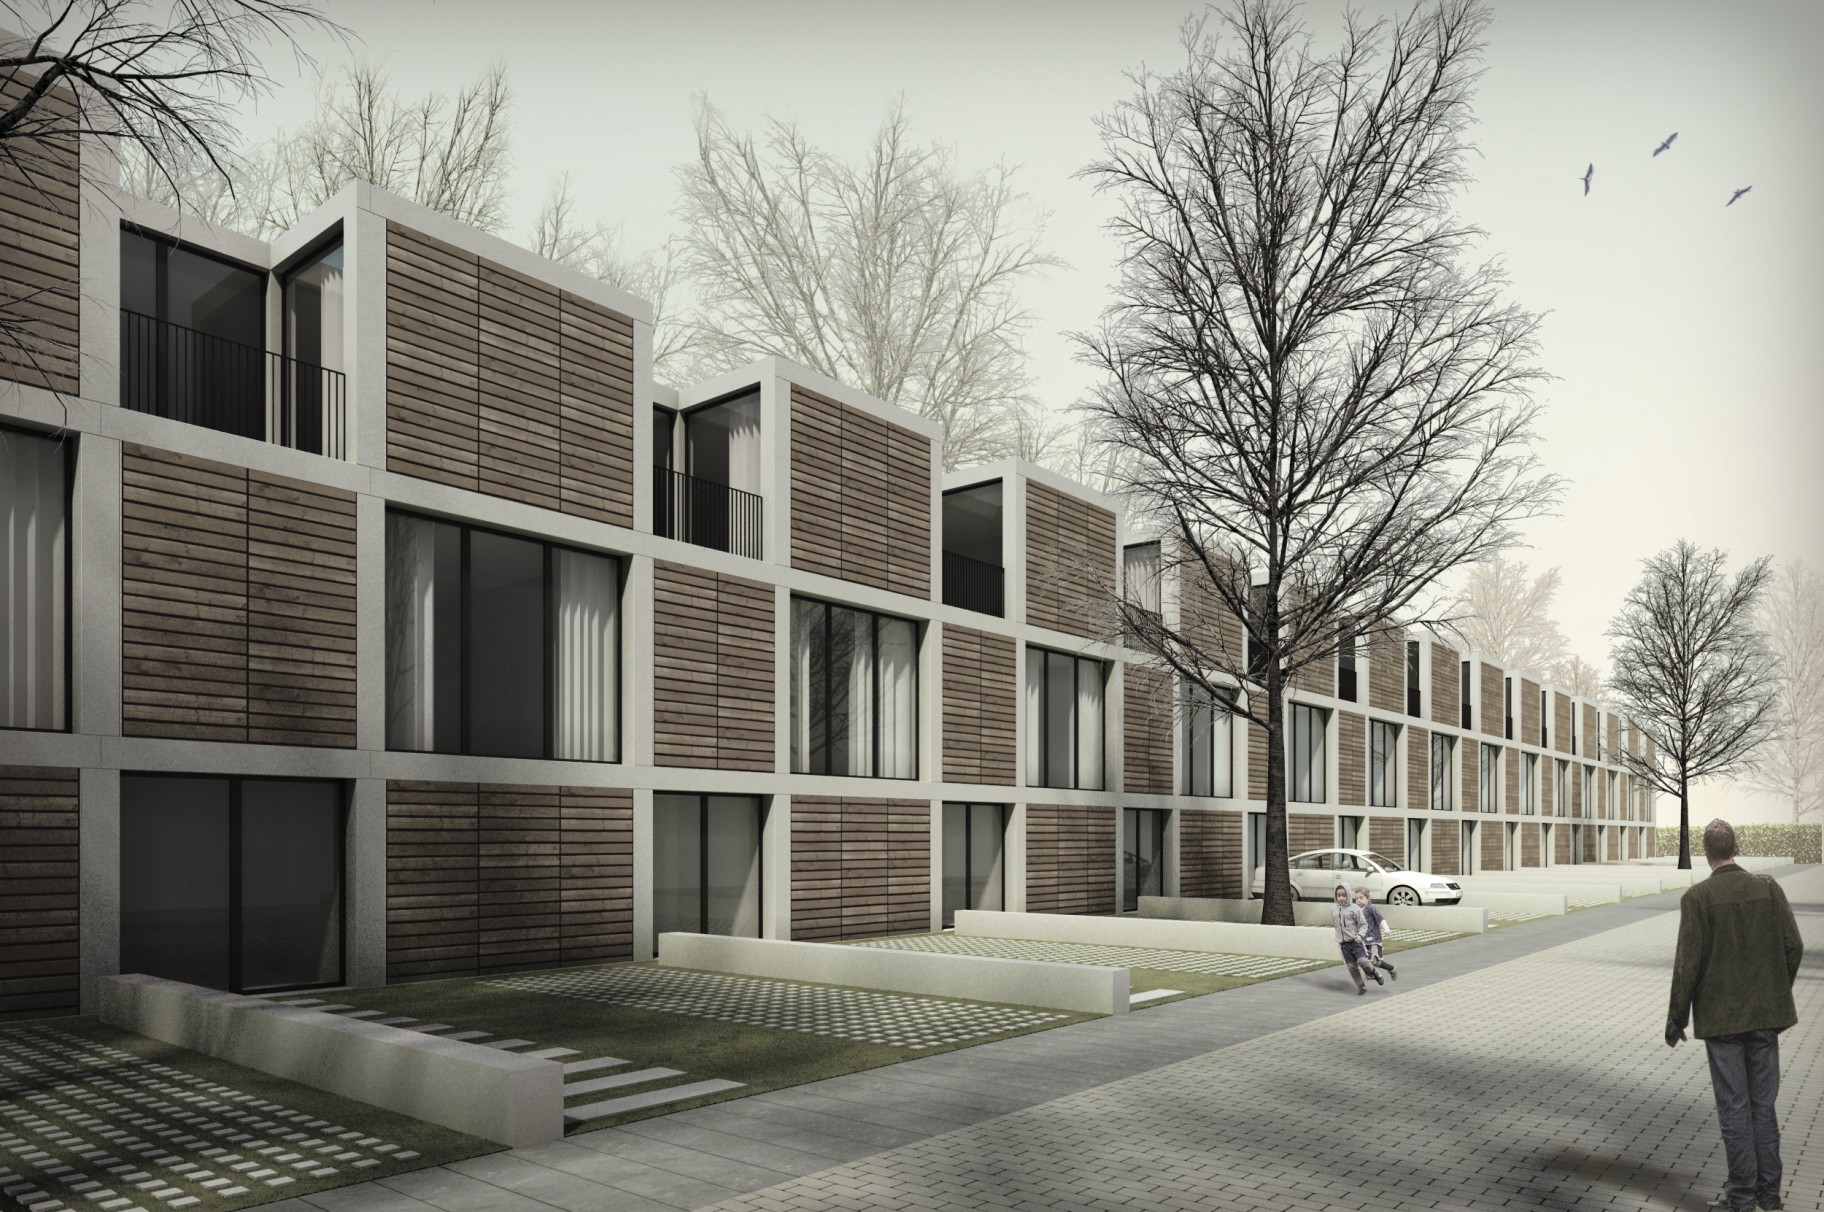 Competition Sociale woningen Officierenwijk submitted